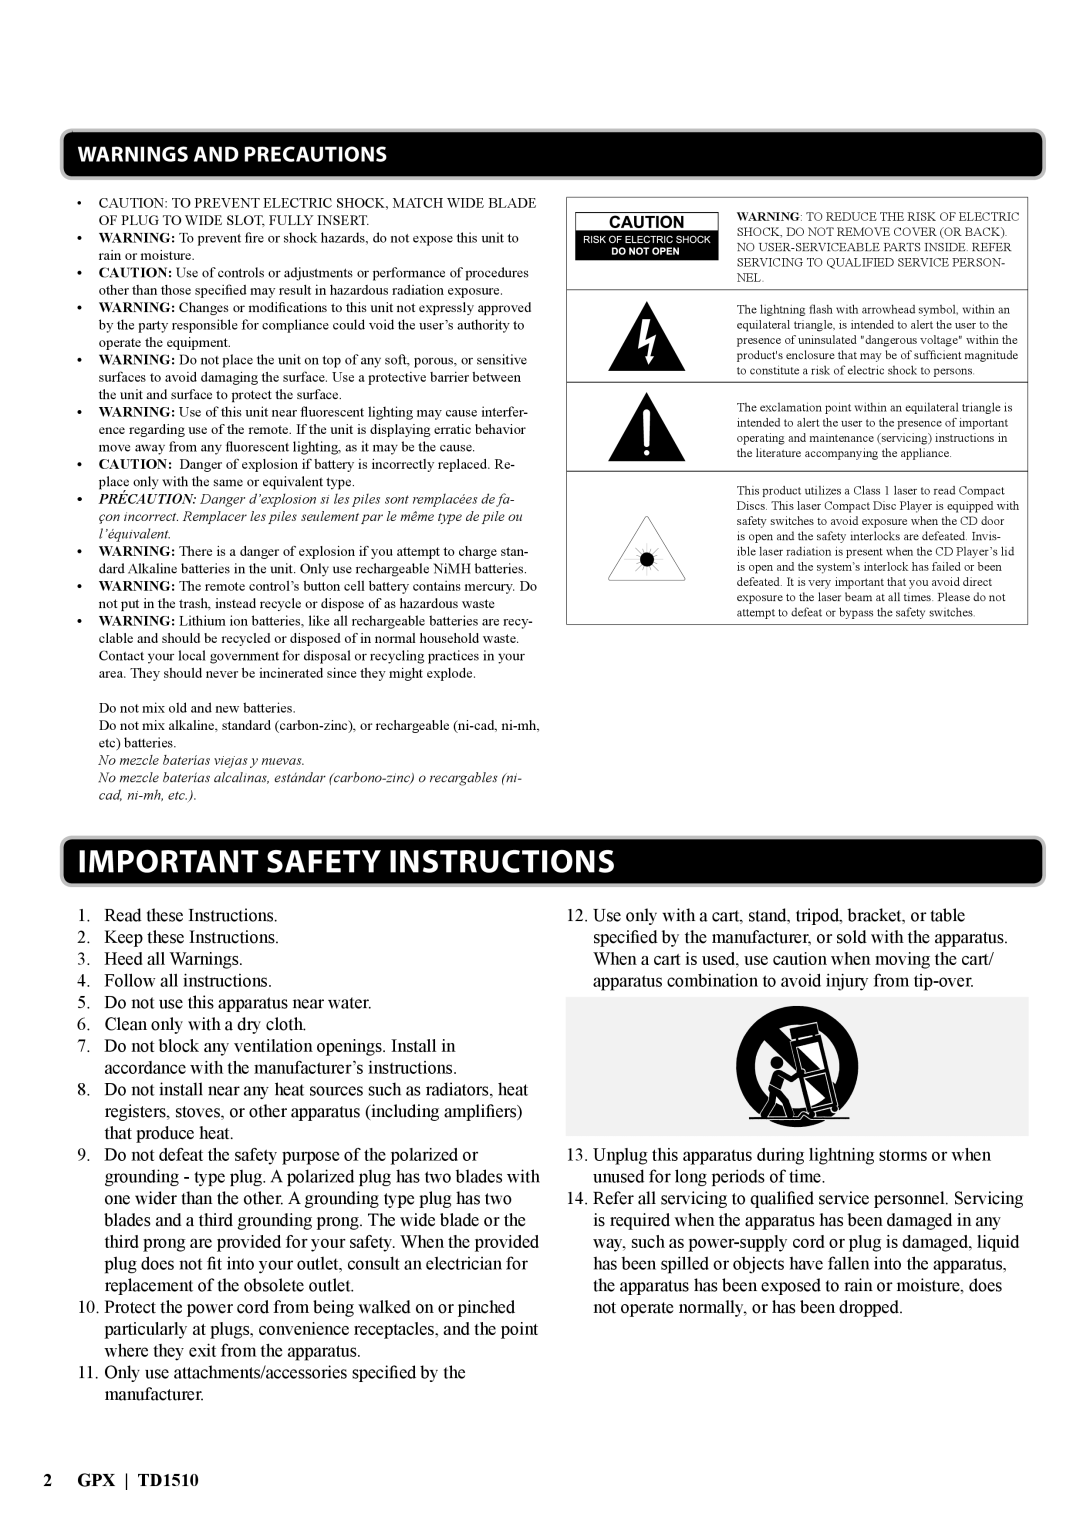 GPX manual Warnings And Precautions, Important Safety Instructions, GPX TD1510 